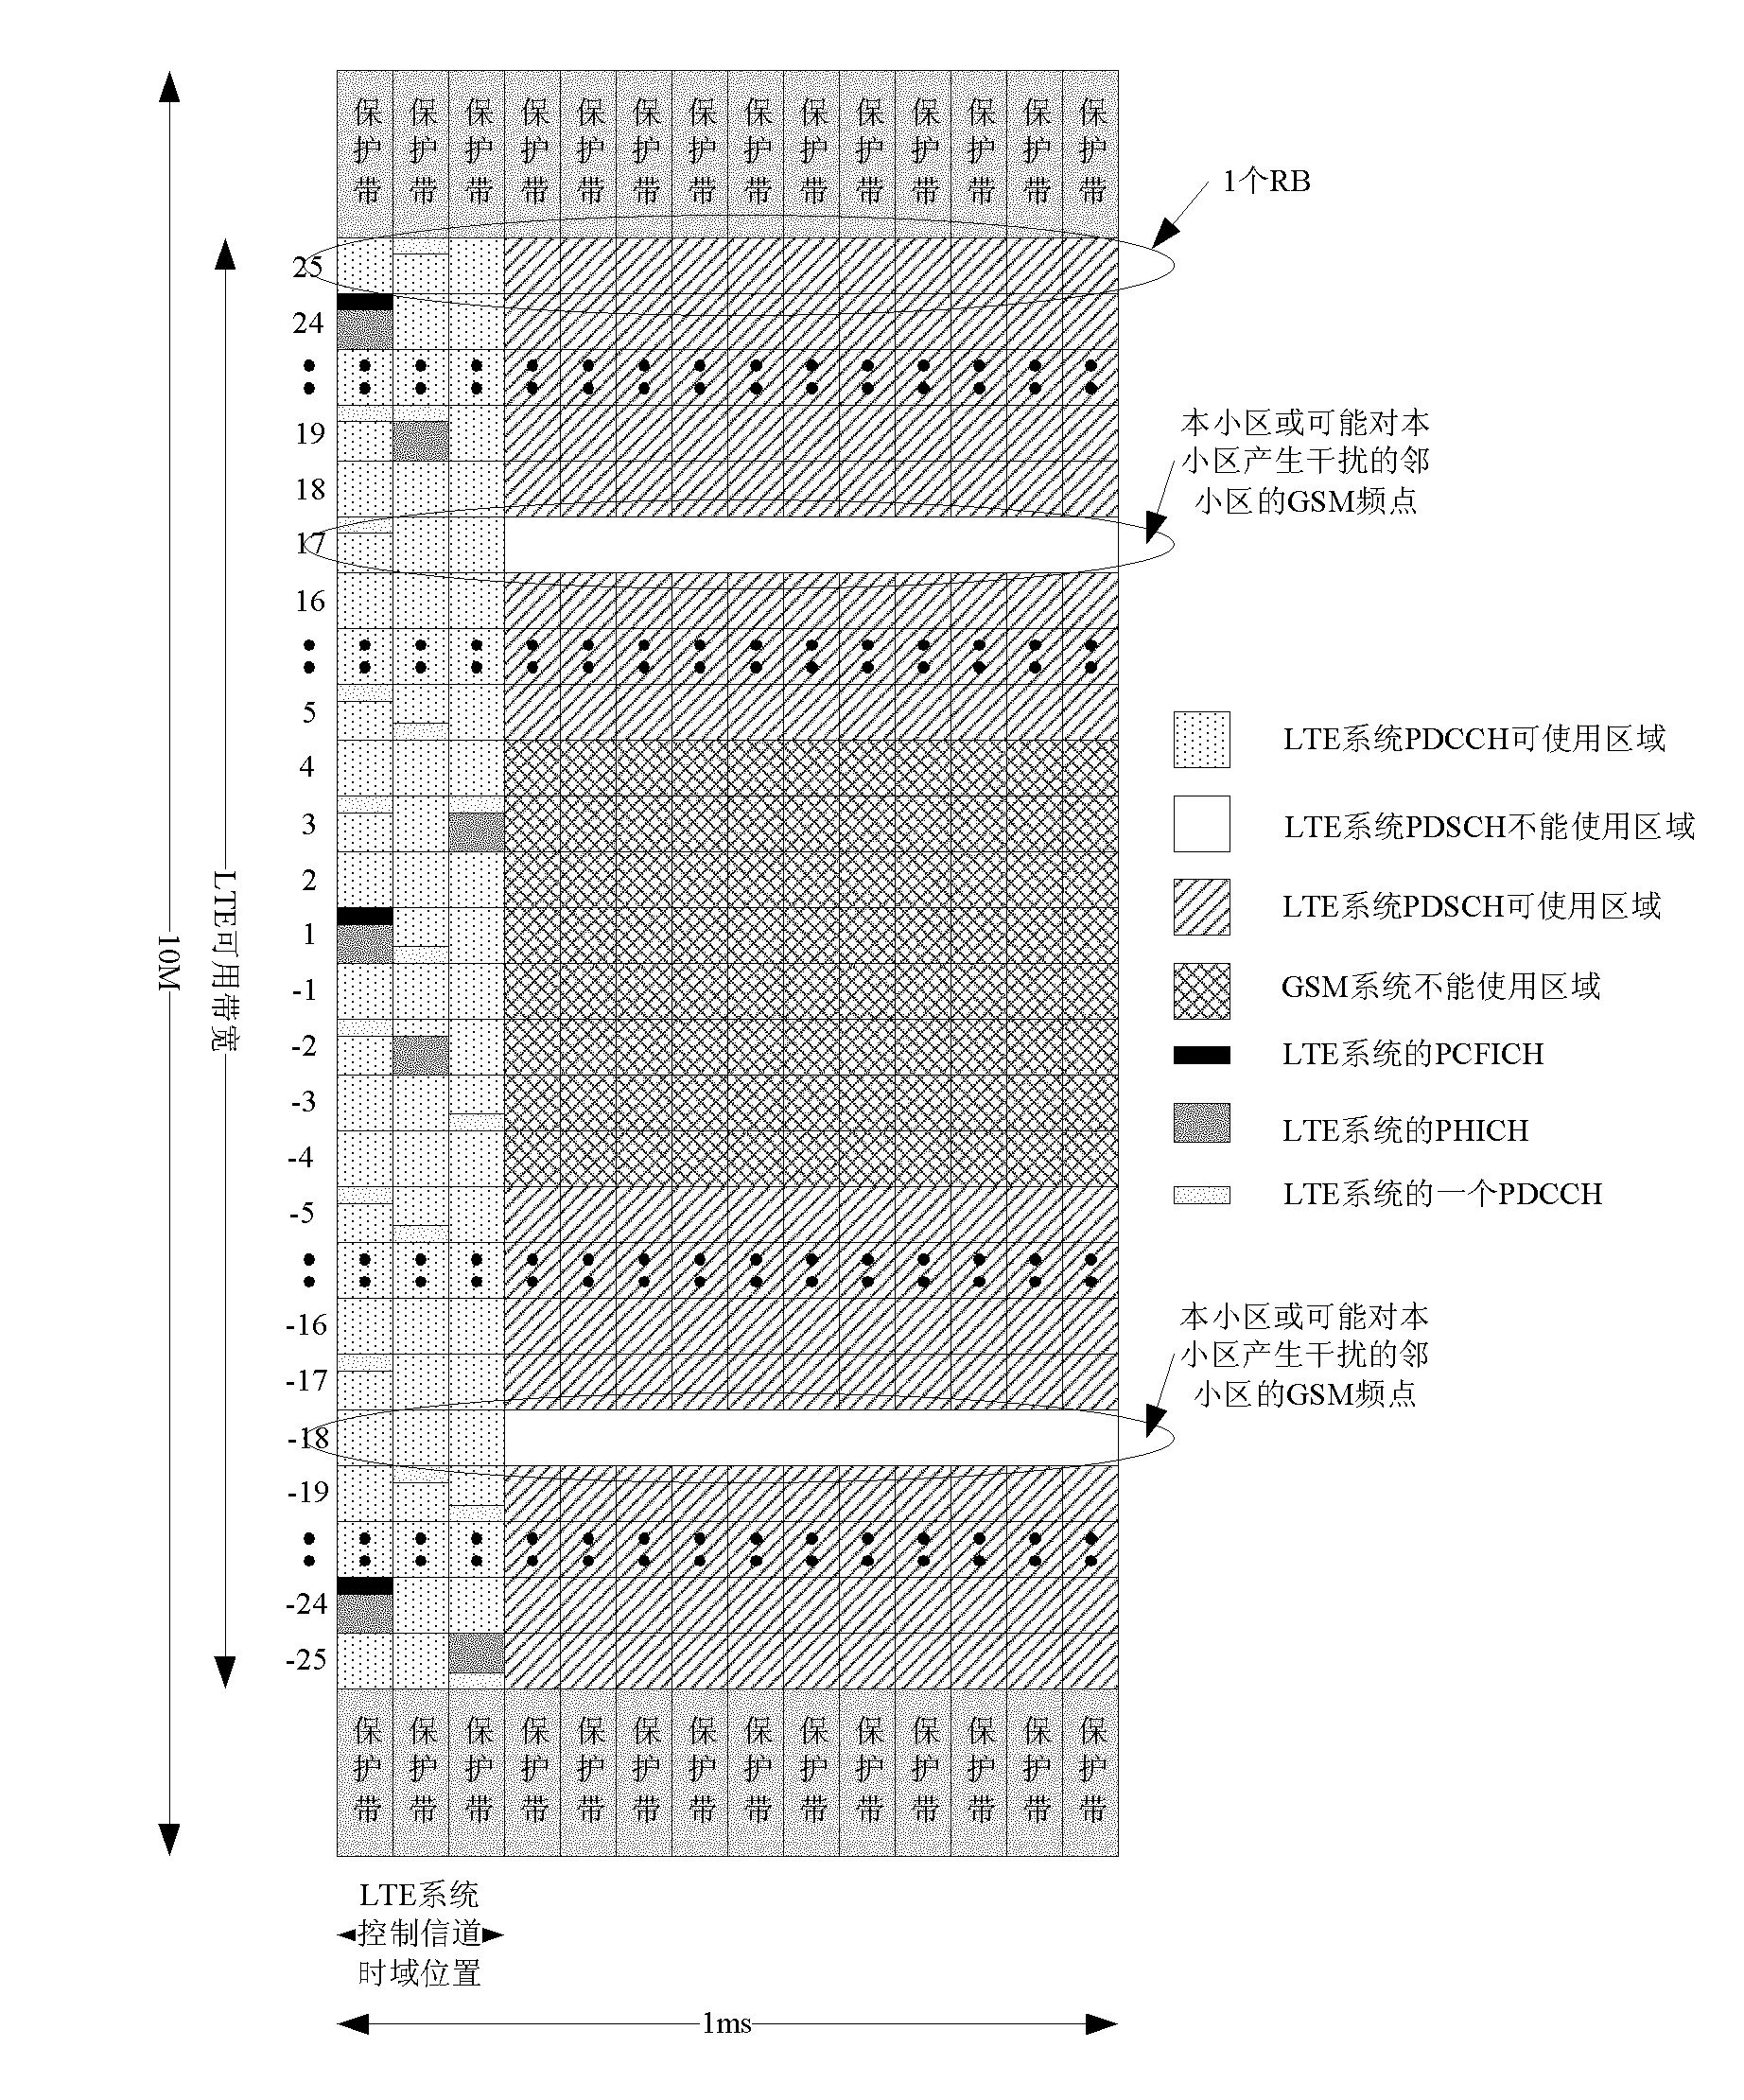 Frequency spectrum sharing method for GSM (Global System for Mobile Communication) system and LTE (Long Term Evolution) system and systems thereof